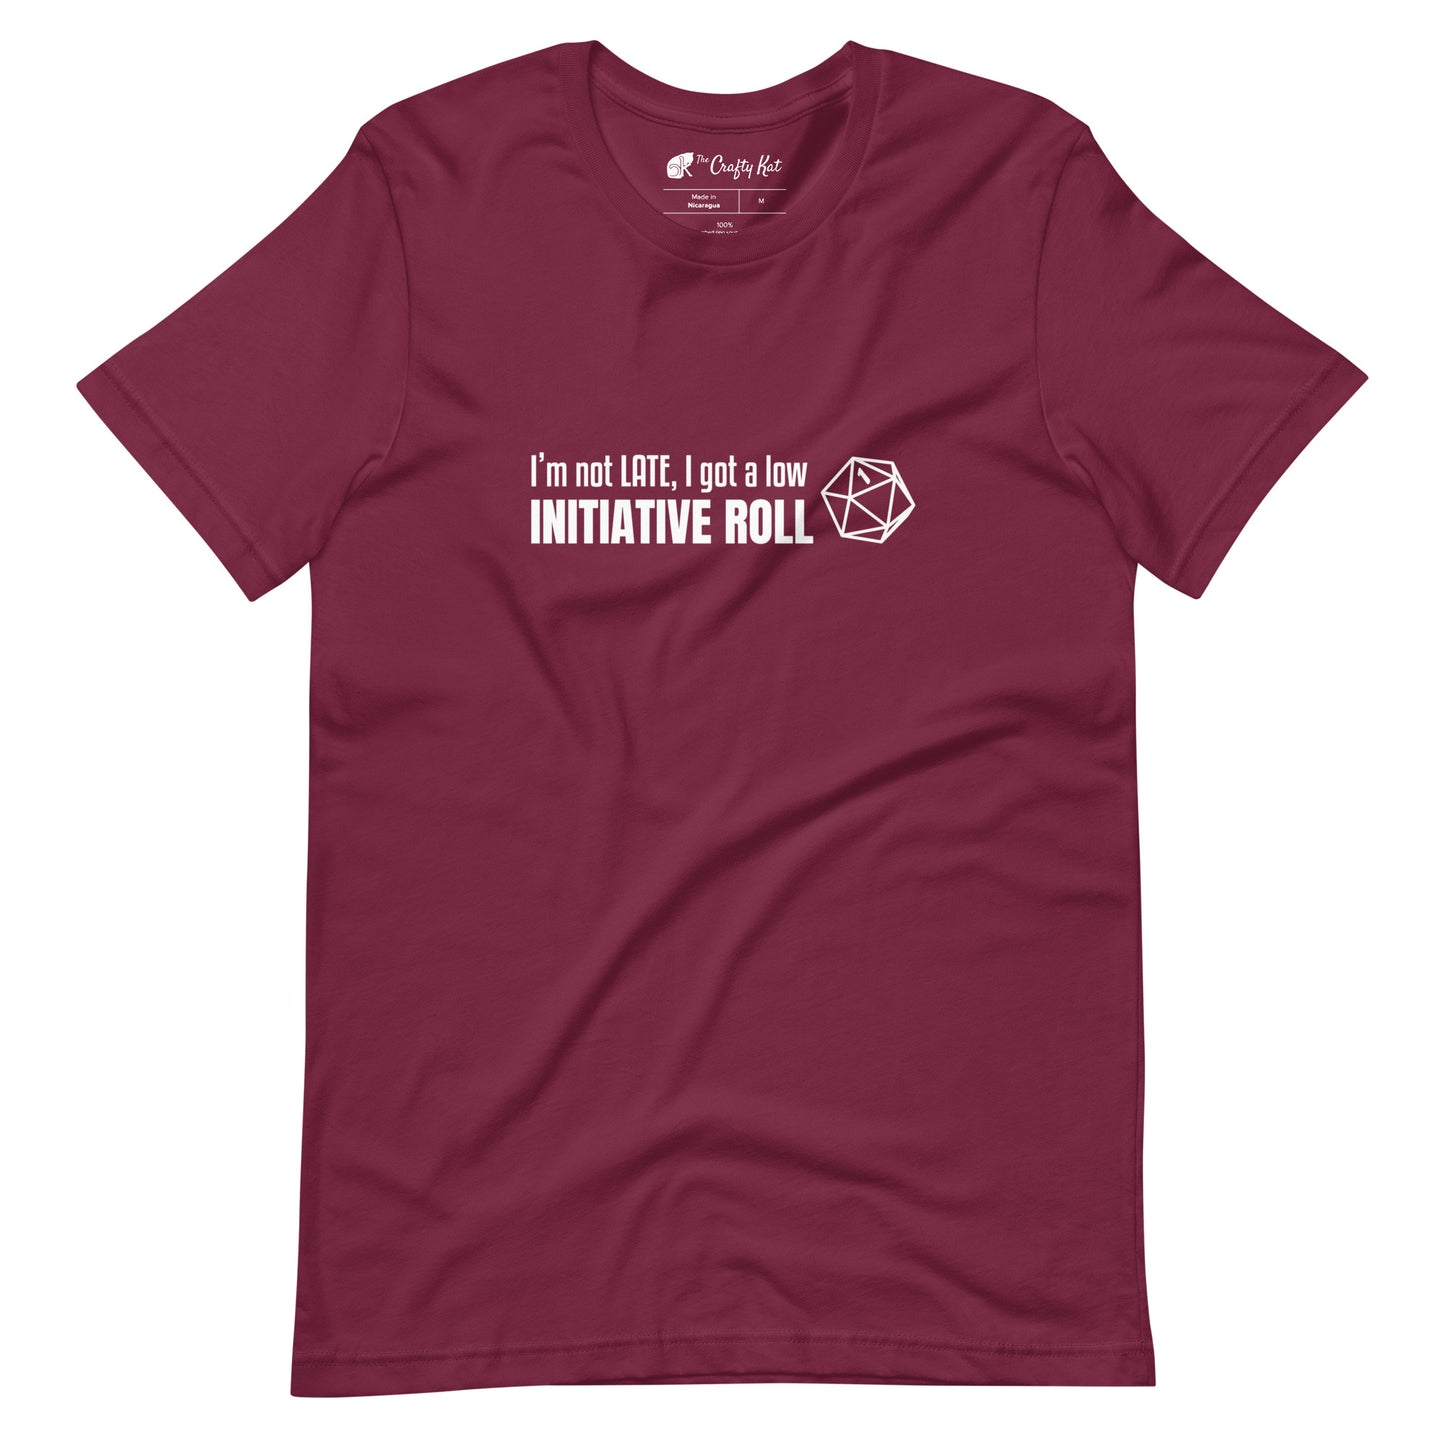 Maroon unisex t-shirt with a graphic of a d20 (twenty-sided die) showing a roll of "1" and text: "I'm not LATE, I got a low INITIATIVE ROLL"